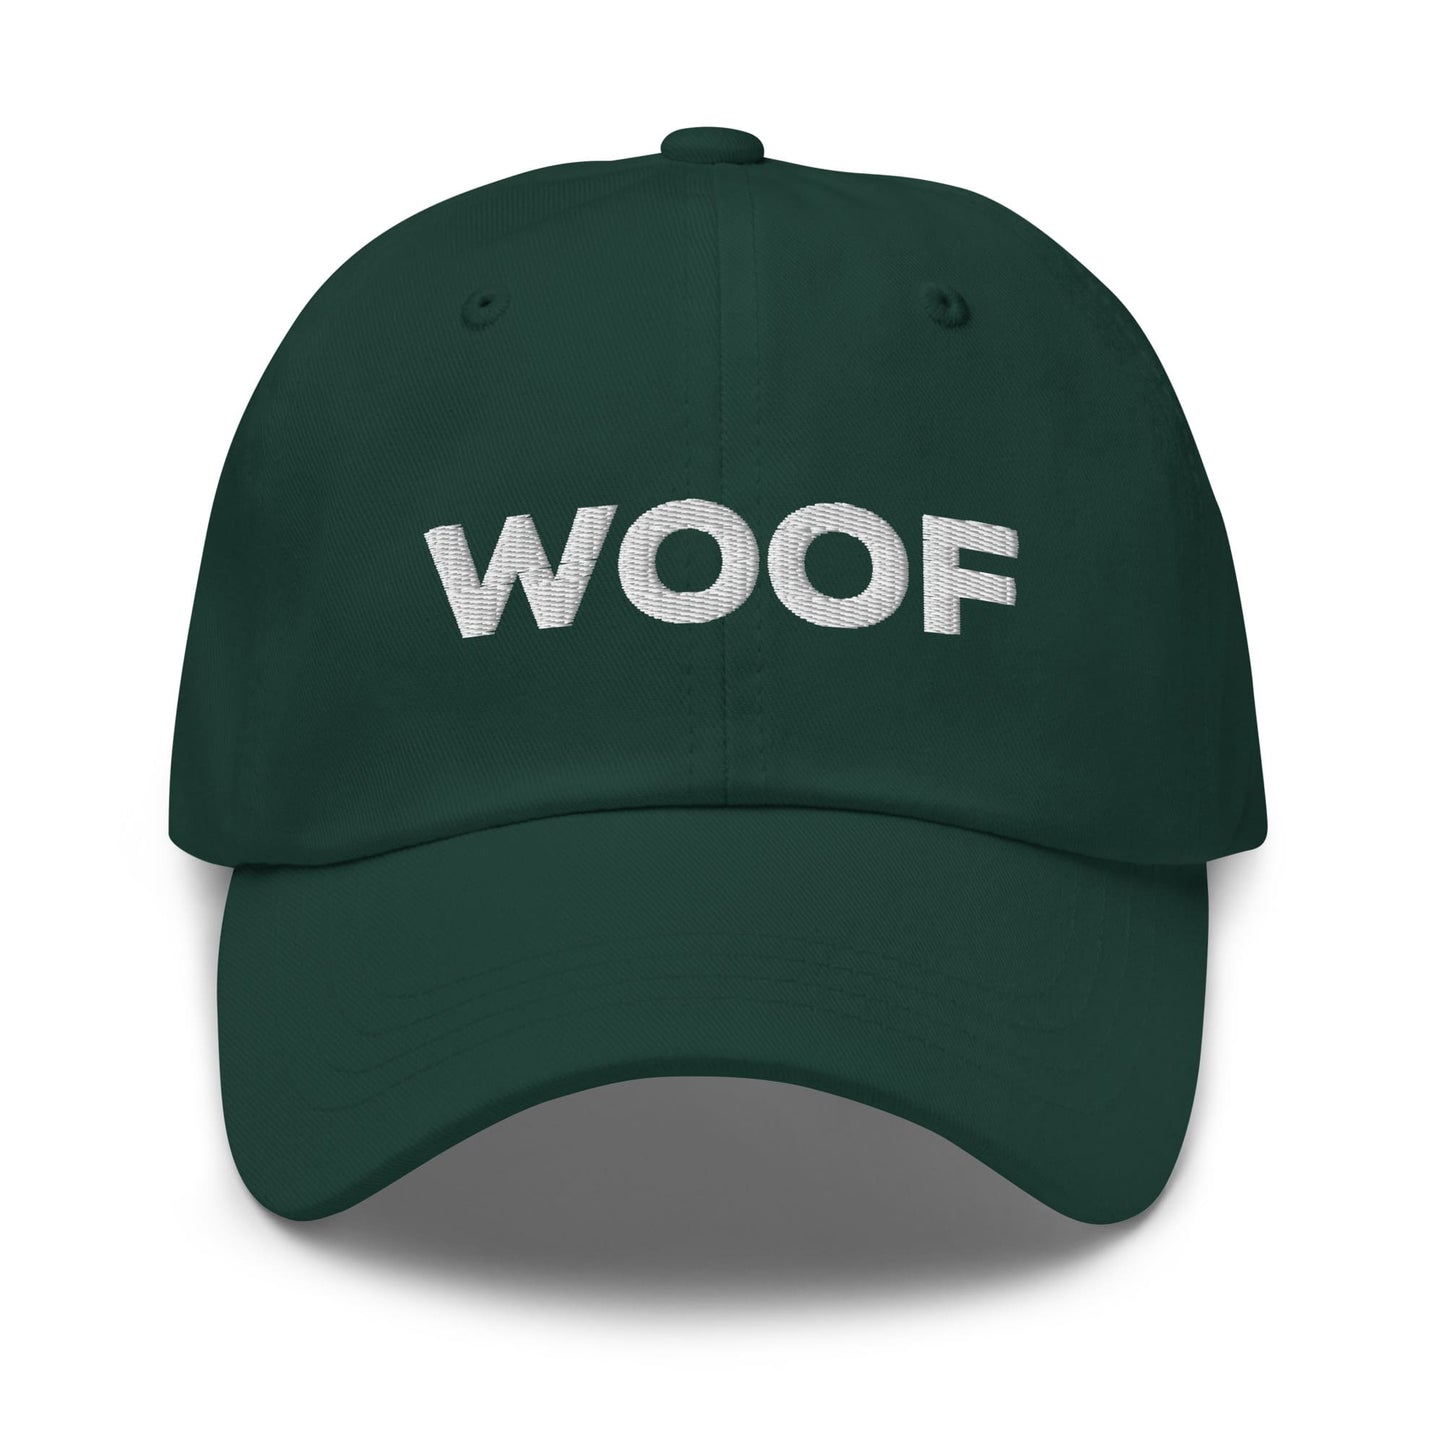 woof hat, embroidered bear pride or puppy play pride cap, green